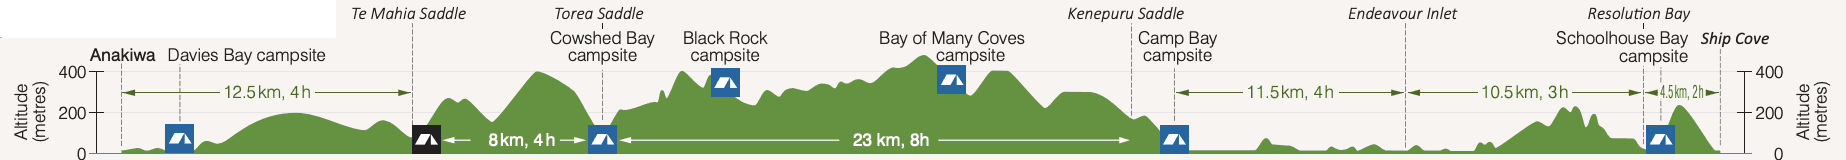 Queen Charlotte Track elevation map from Anakiwa to Ship Cove